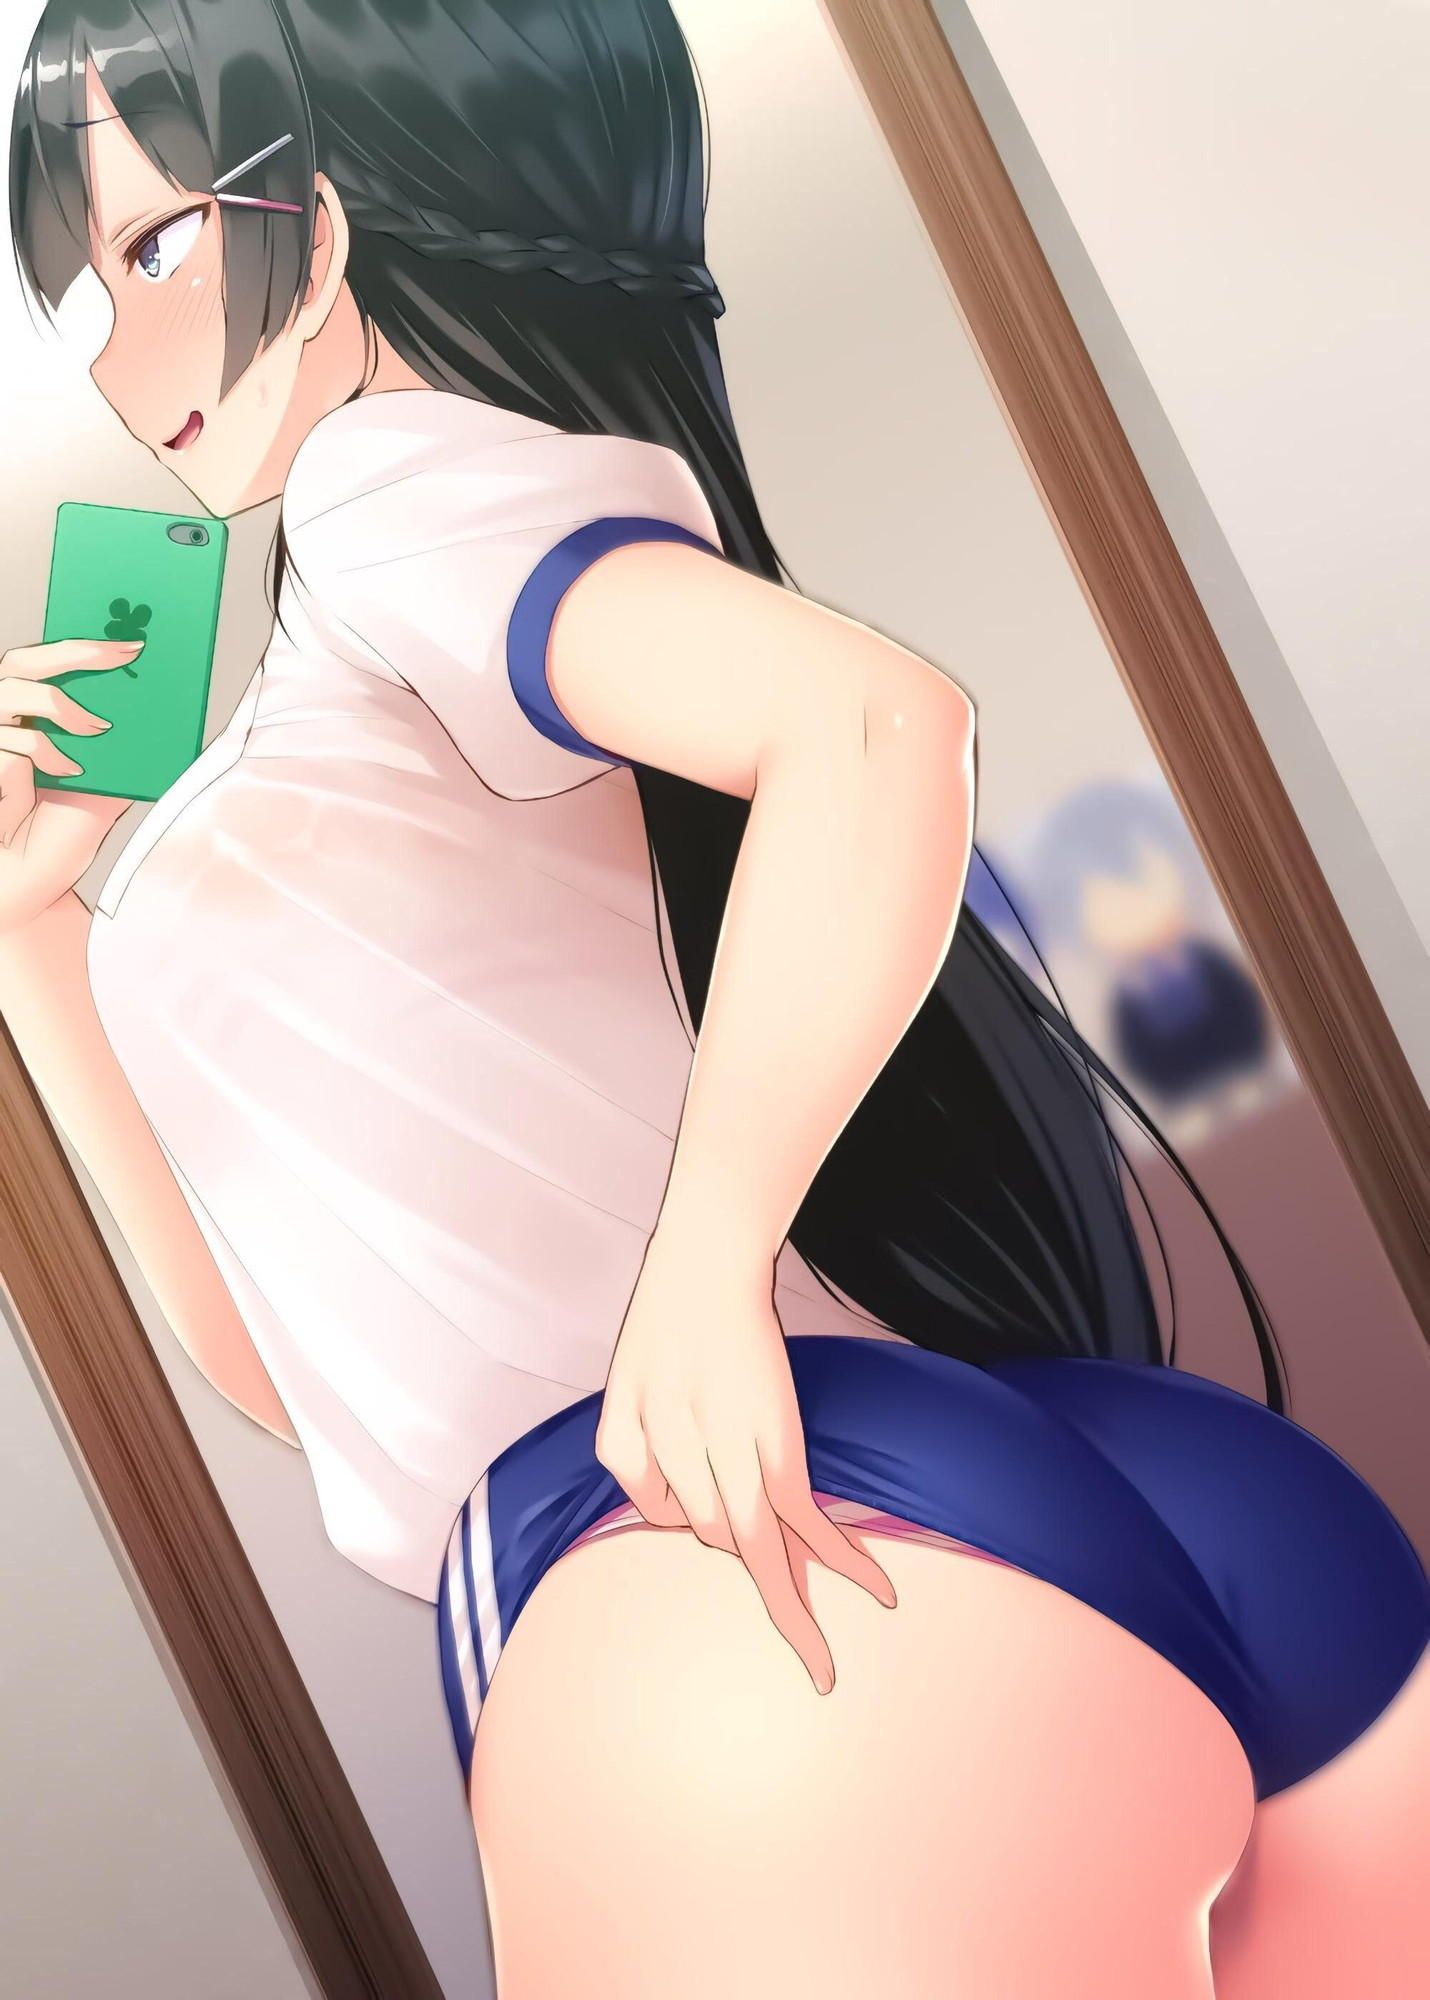 It's grown too much and doesn't fit the size?! Image of a girl ♪ in bloomers + gym clothes with snappy breasts and buttocks 14